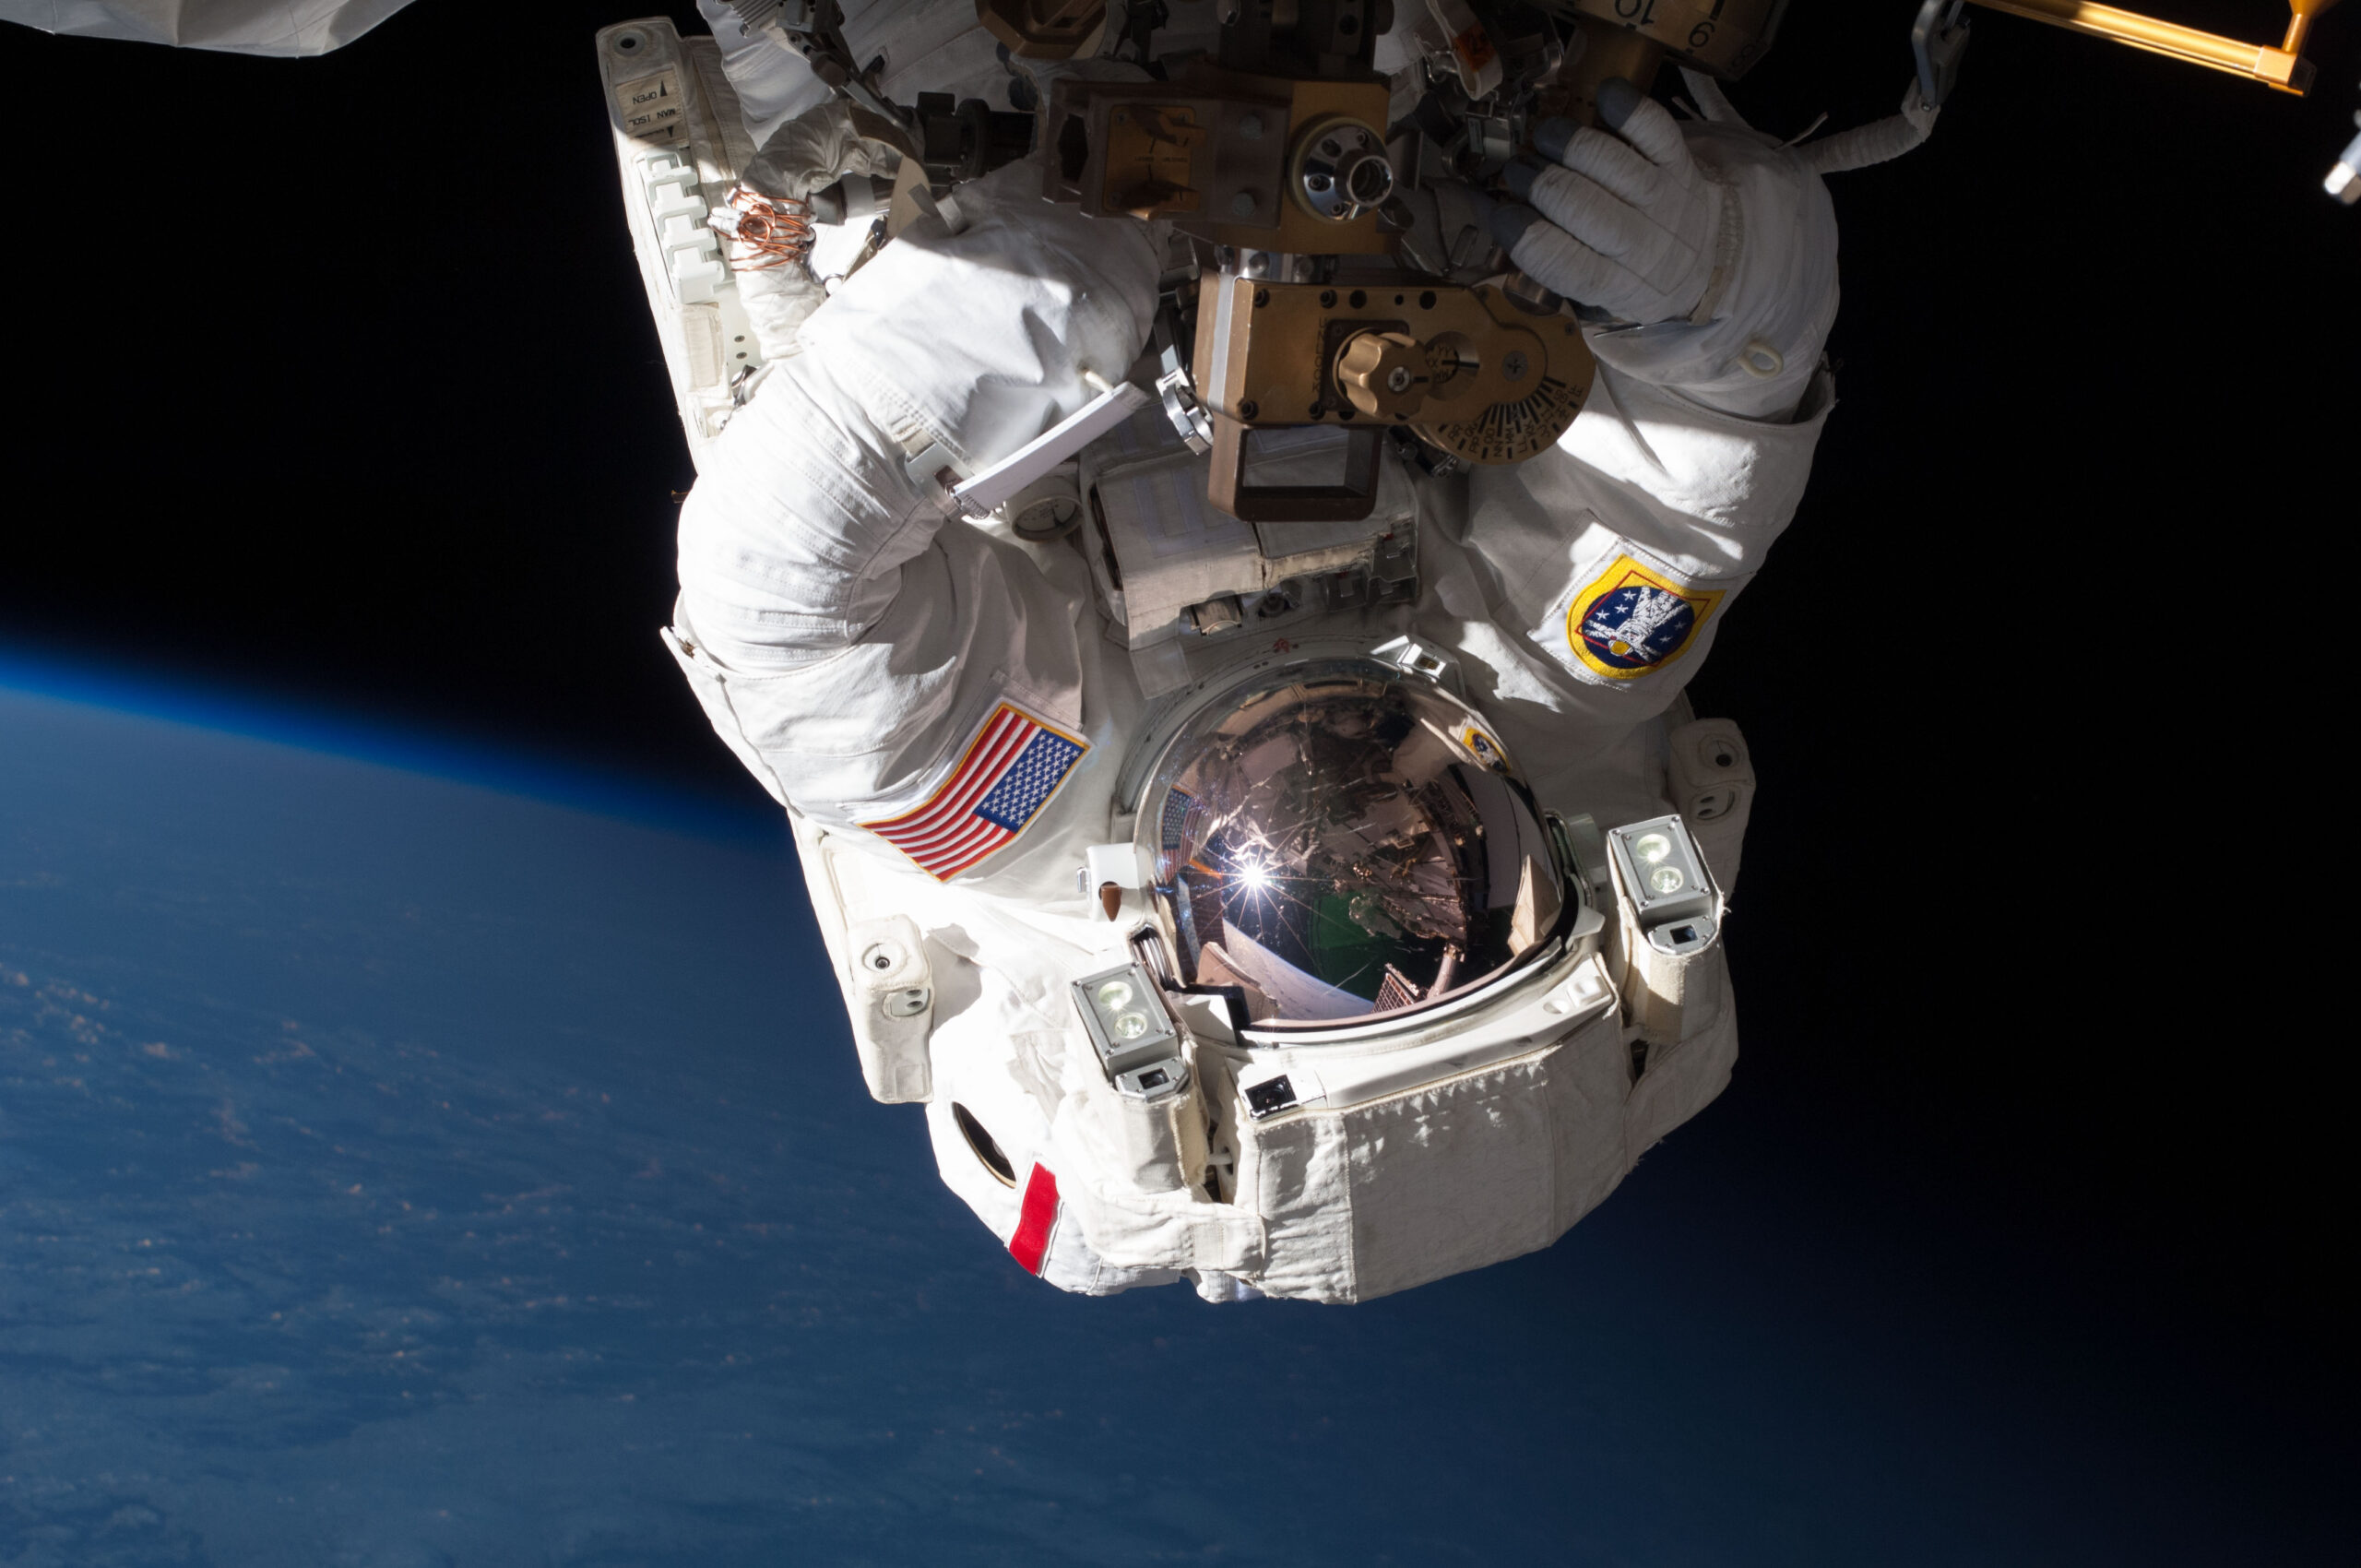 Ask Us Anything: What happens to your body when you die in space?